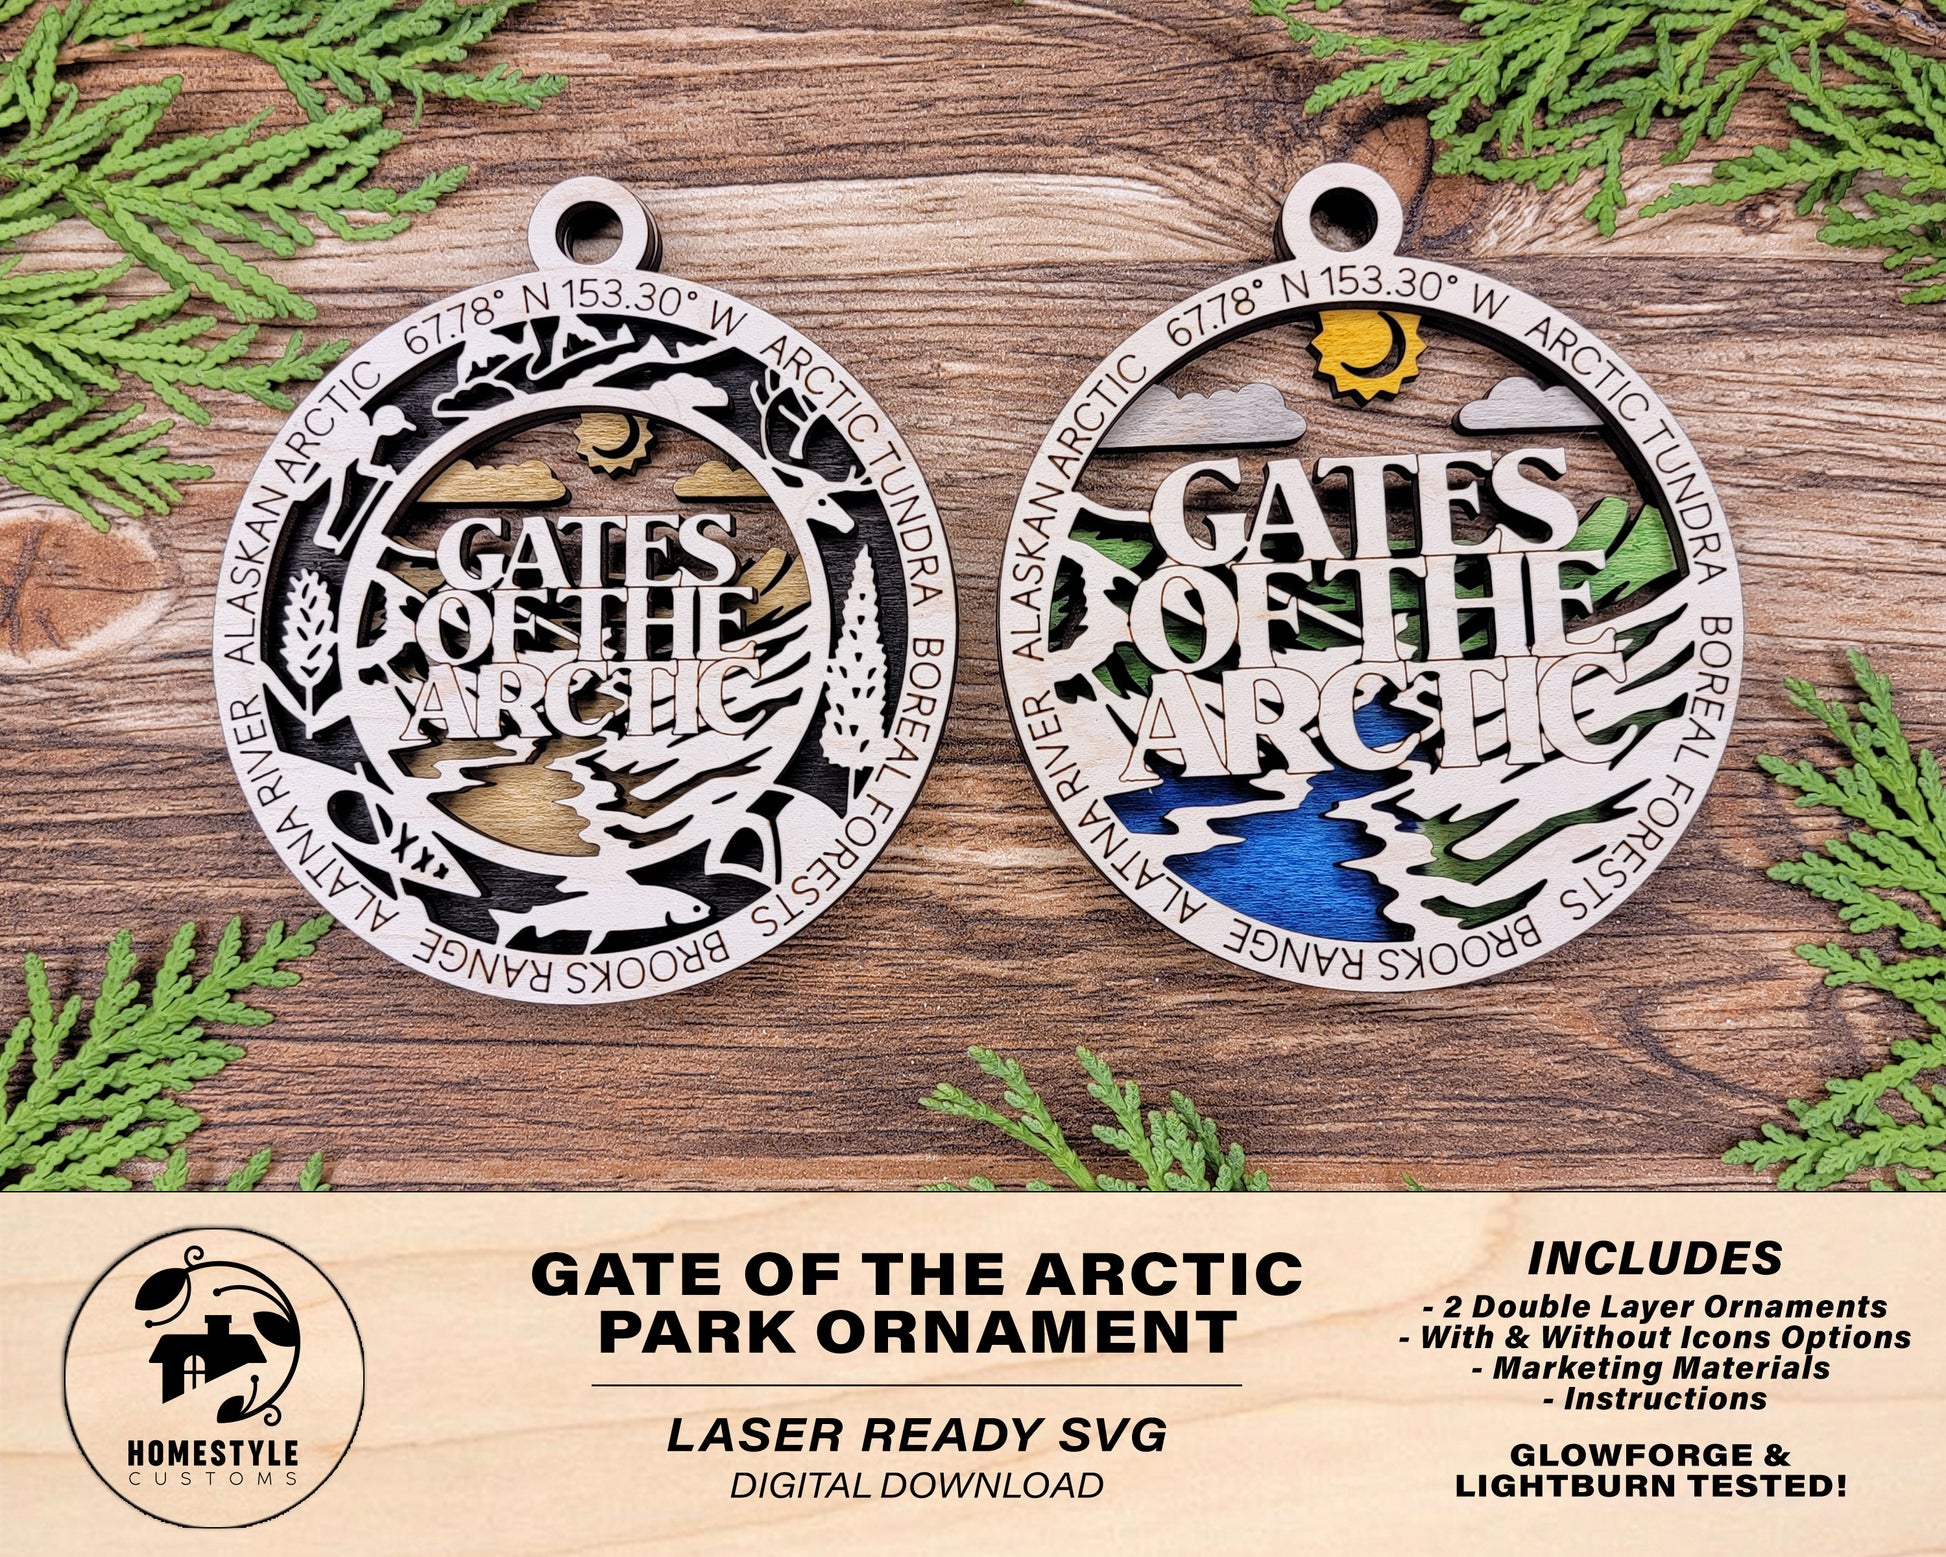 Gates of the Arctic Park Ornament - Includes 2 Ornaments - Laser Design SVG, PDF, AI File Download - Tested On Glowforge and LightBurn